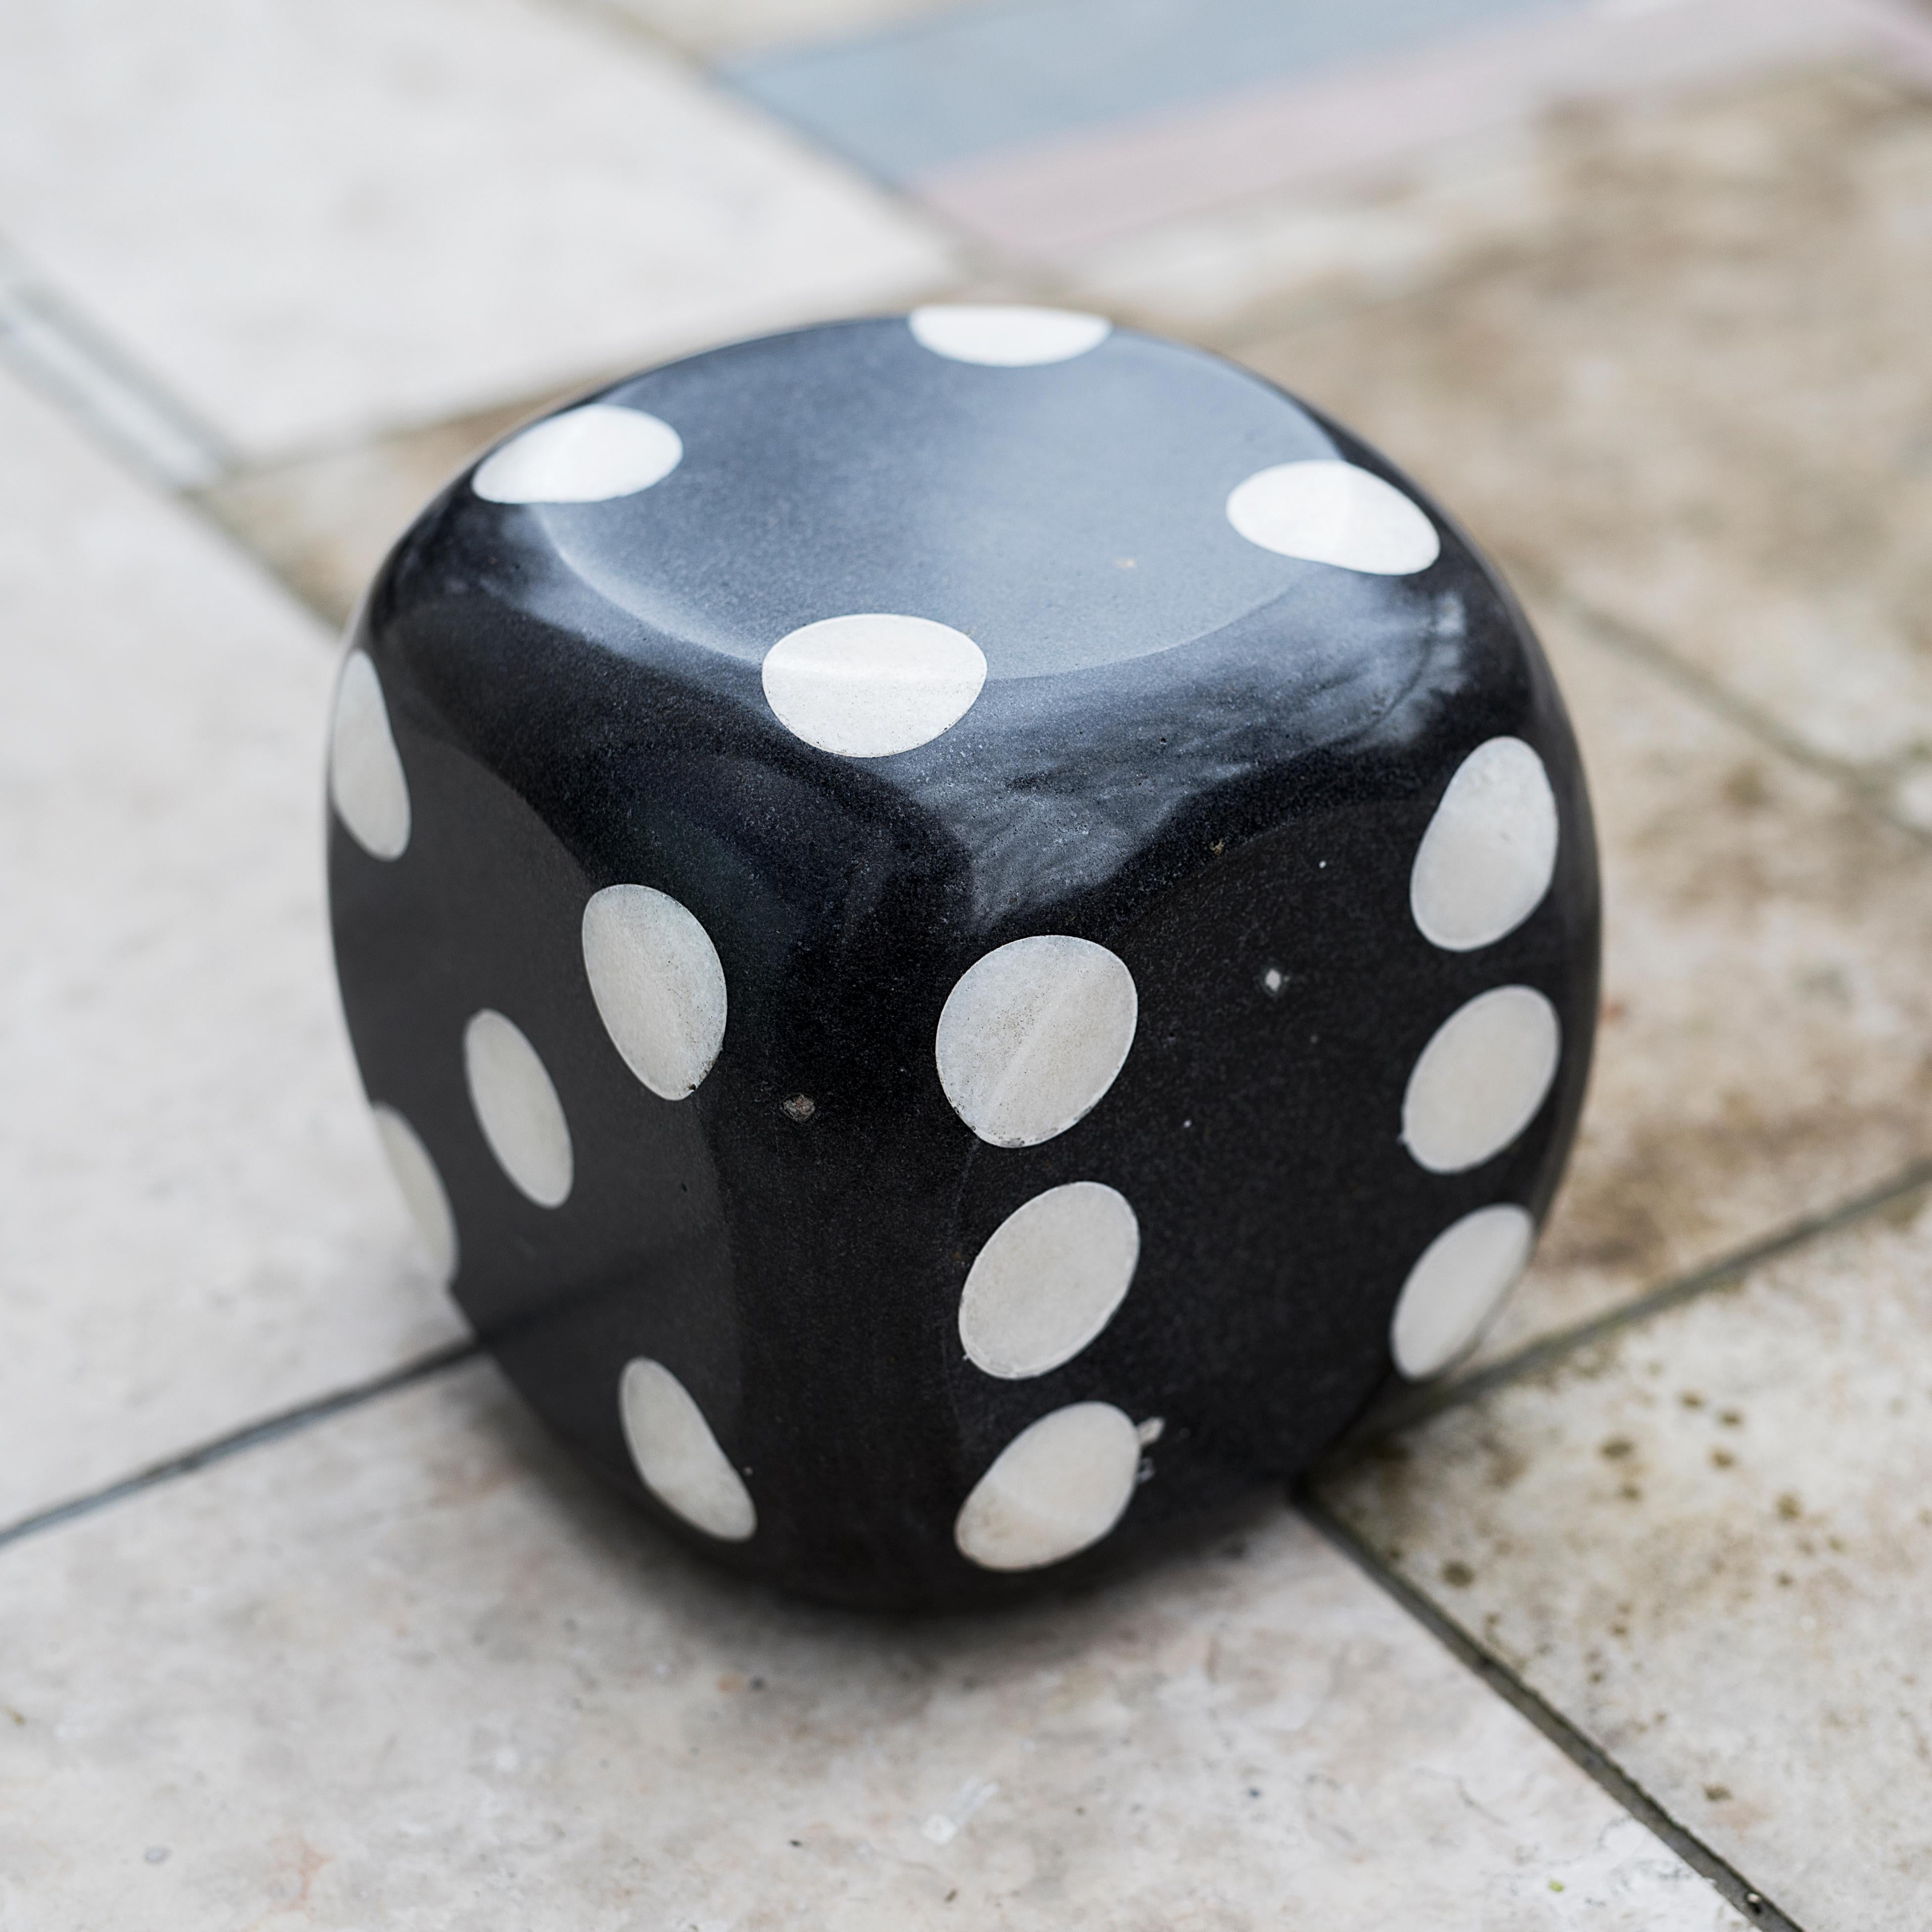 Artist Commentary:
Rolling dice, turning luck! All 6 sides of the dice has the same probability. When the dice is cubic, the results are digital, but when the dice getting closer to the ball shape the results could be analog and infinite when it is